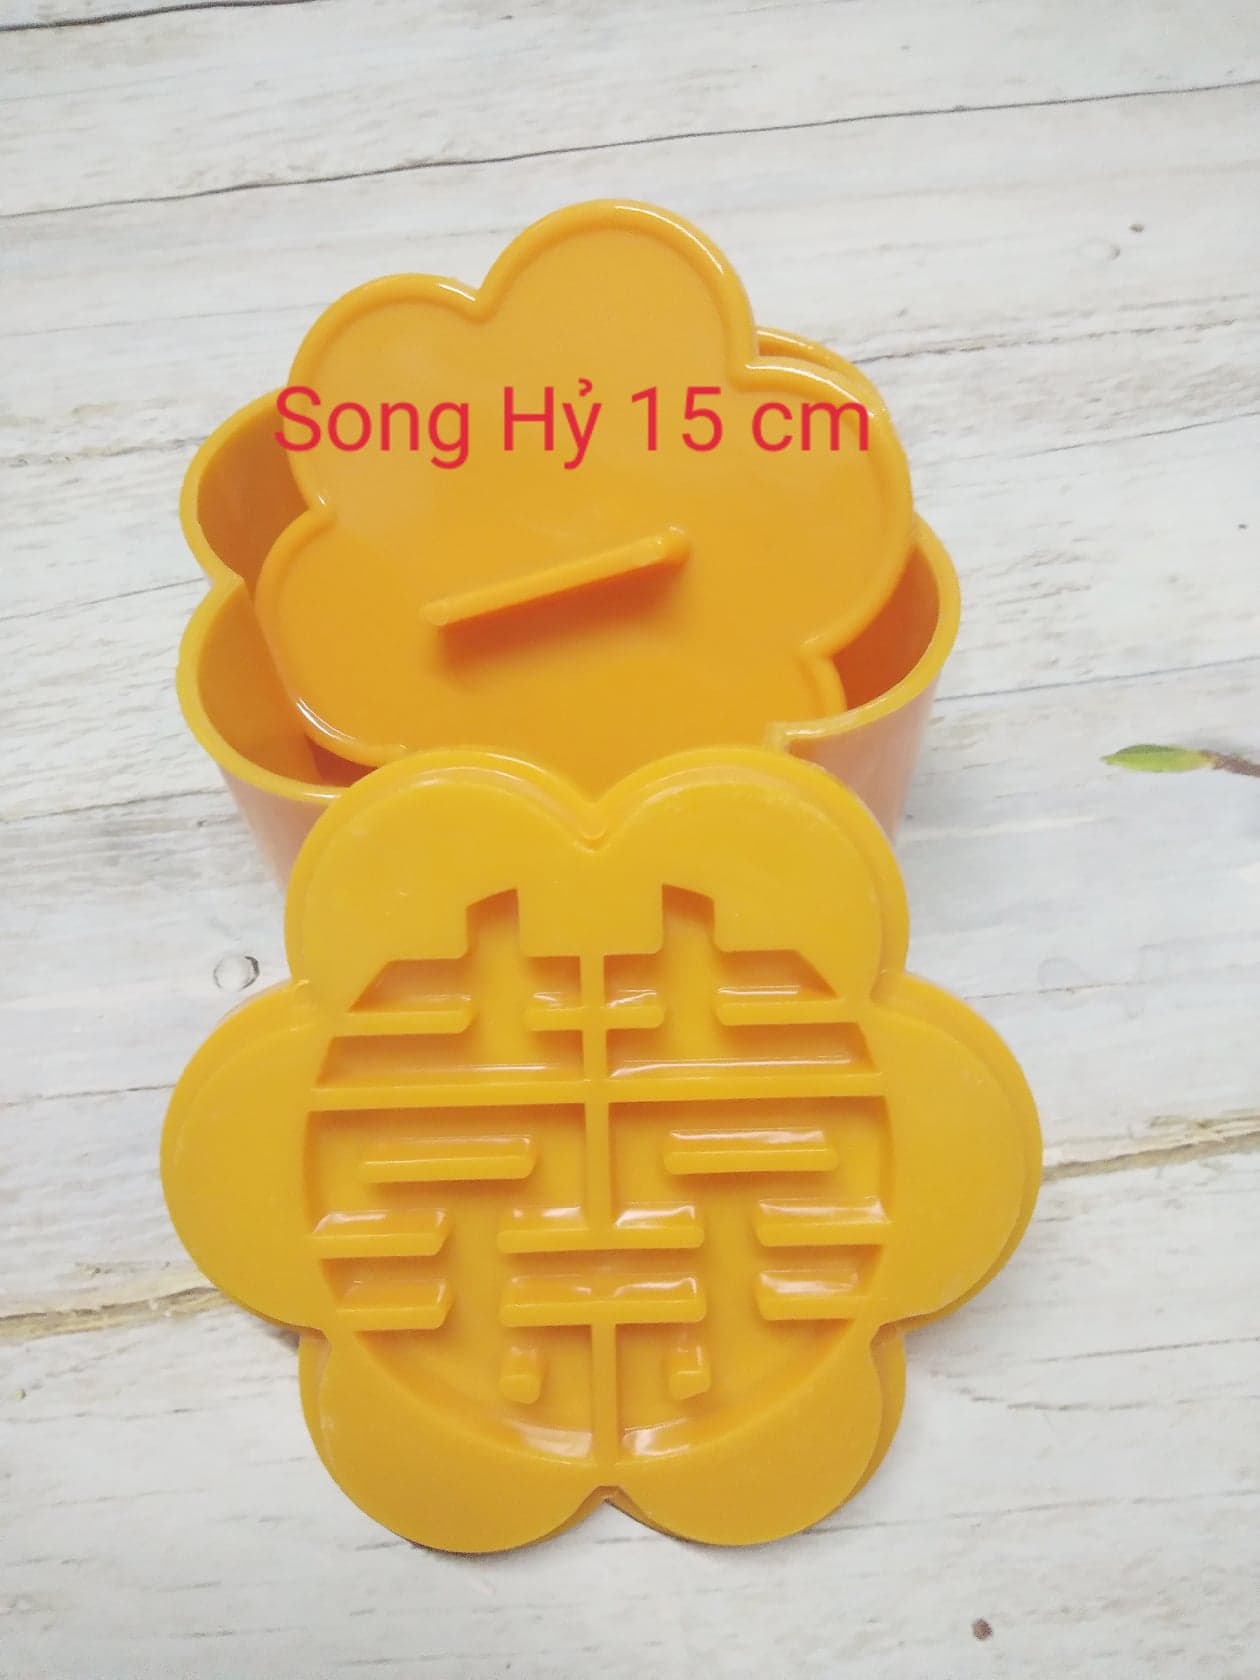 Chữ Song Hỷ Vector